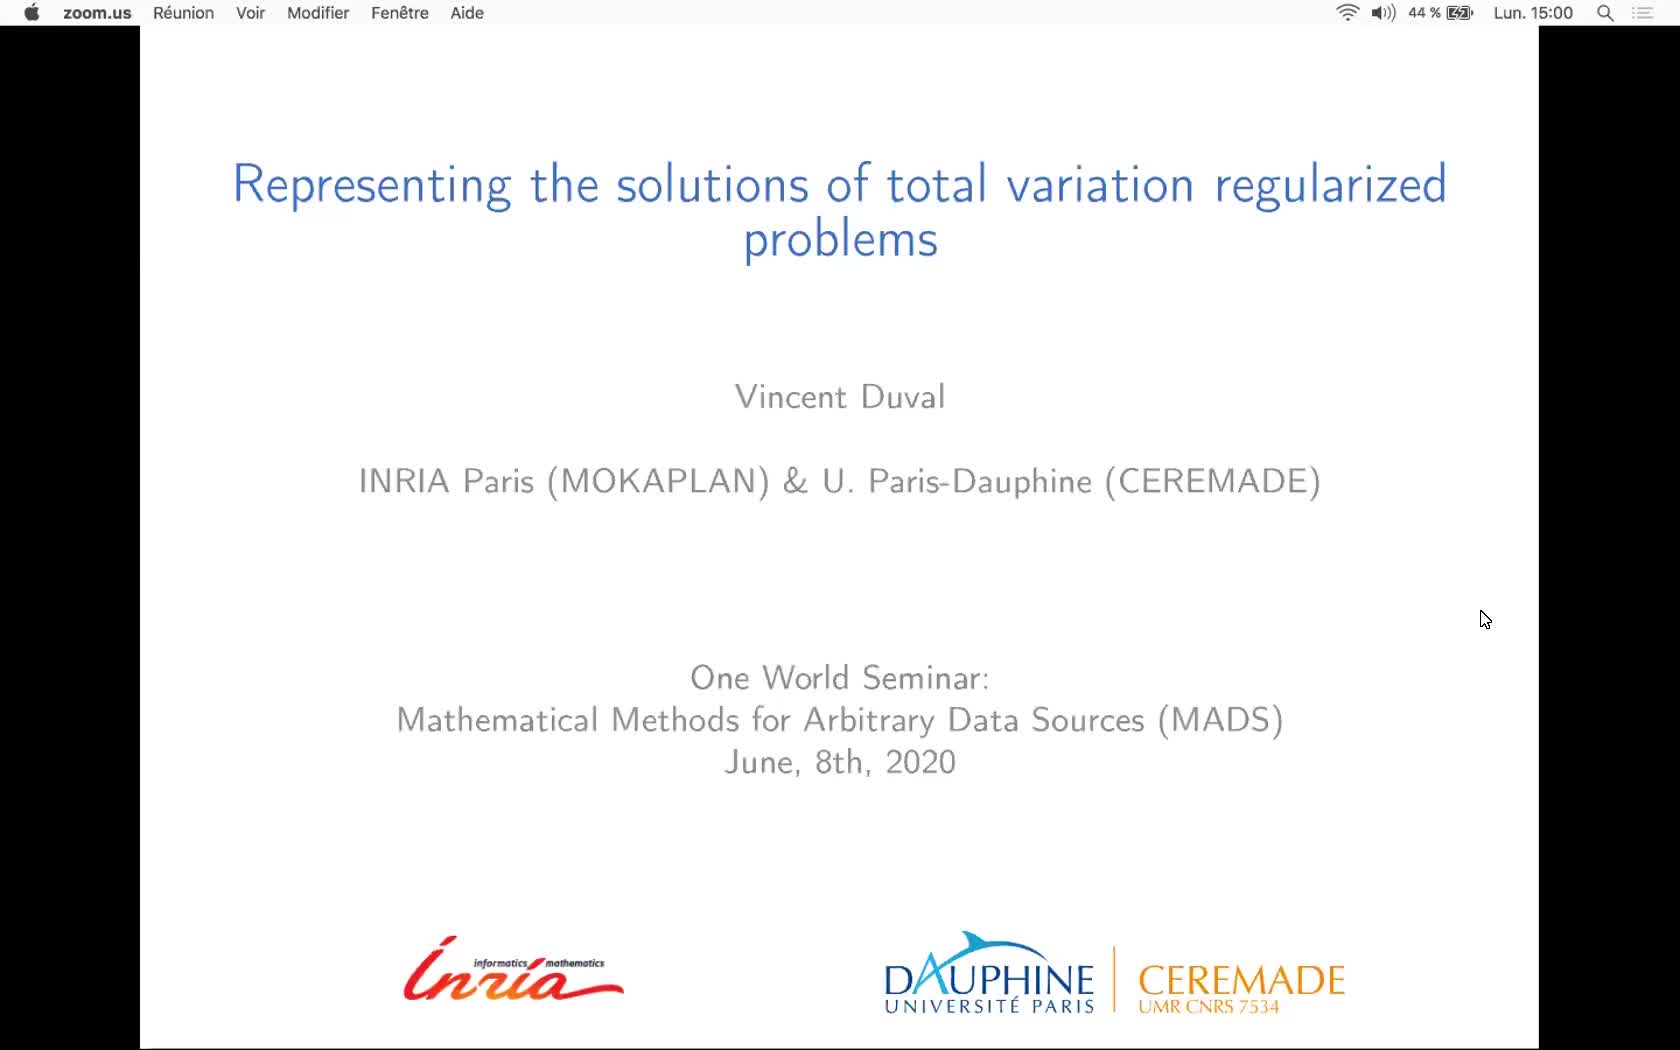 Vincent Duval: Representing the solutions of total variation regularized problems preview image